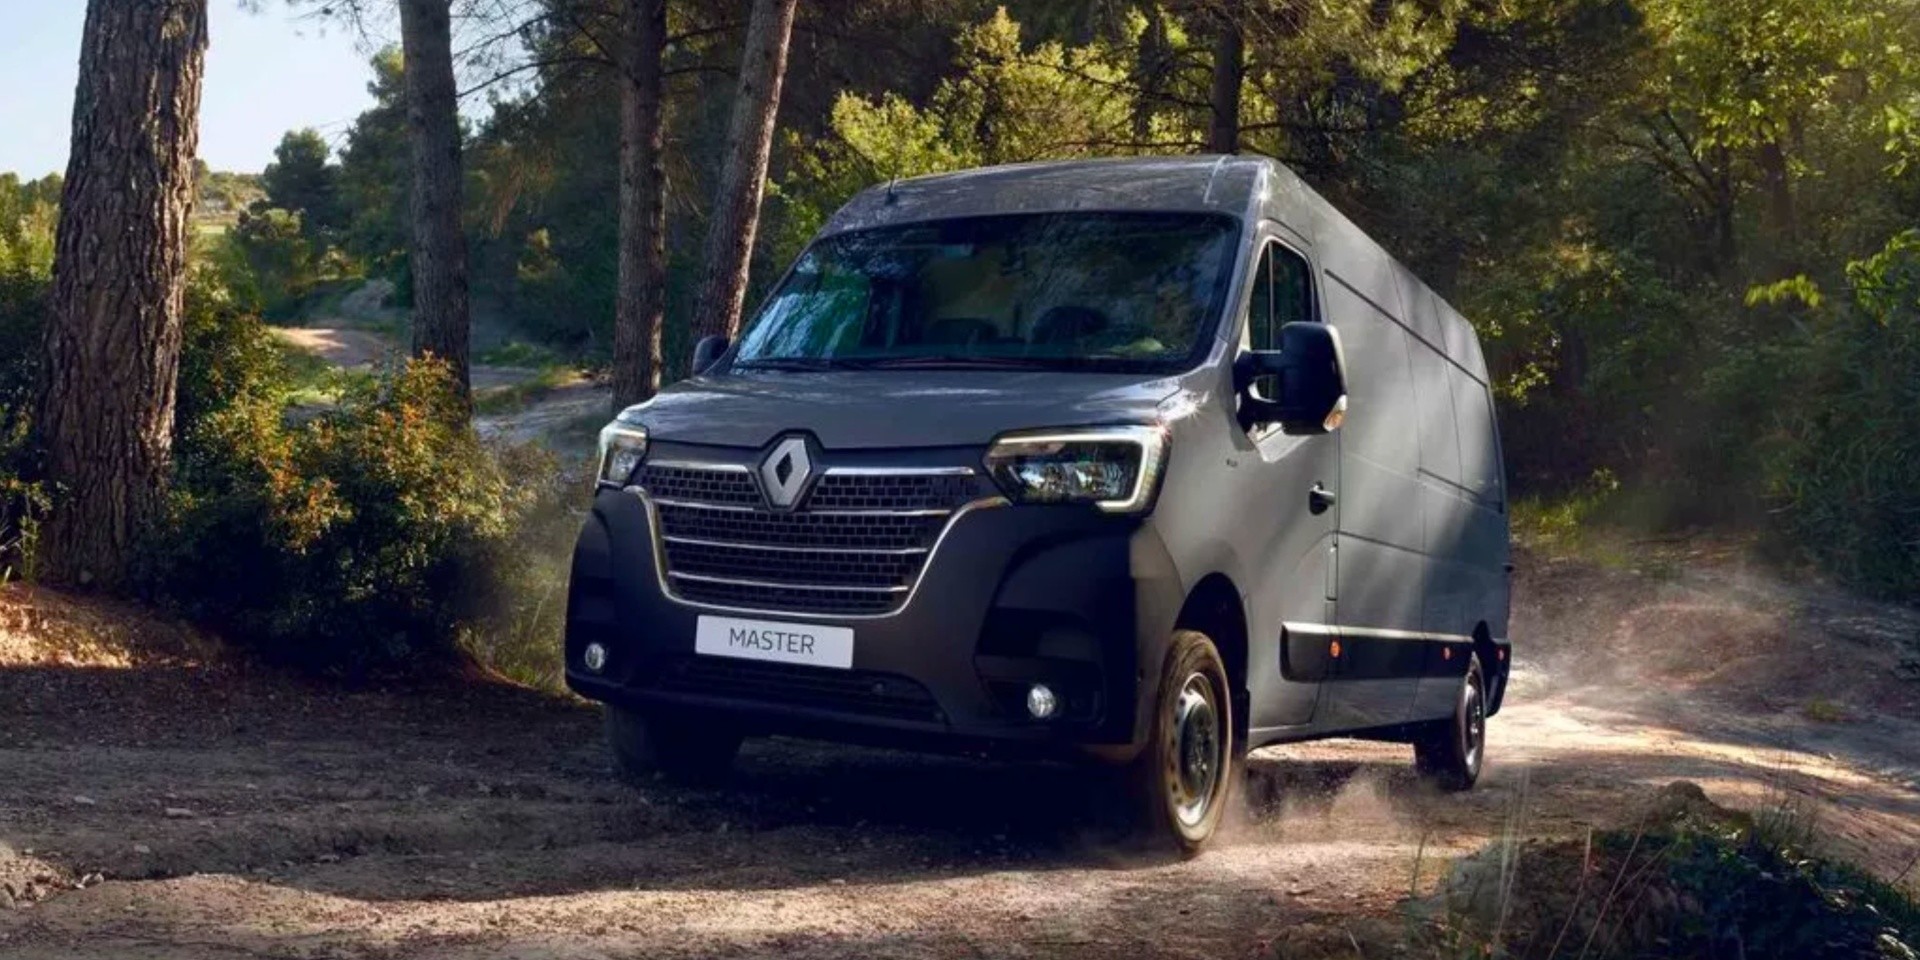 grey renault master on forest road front view